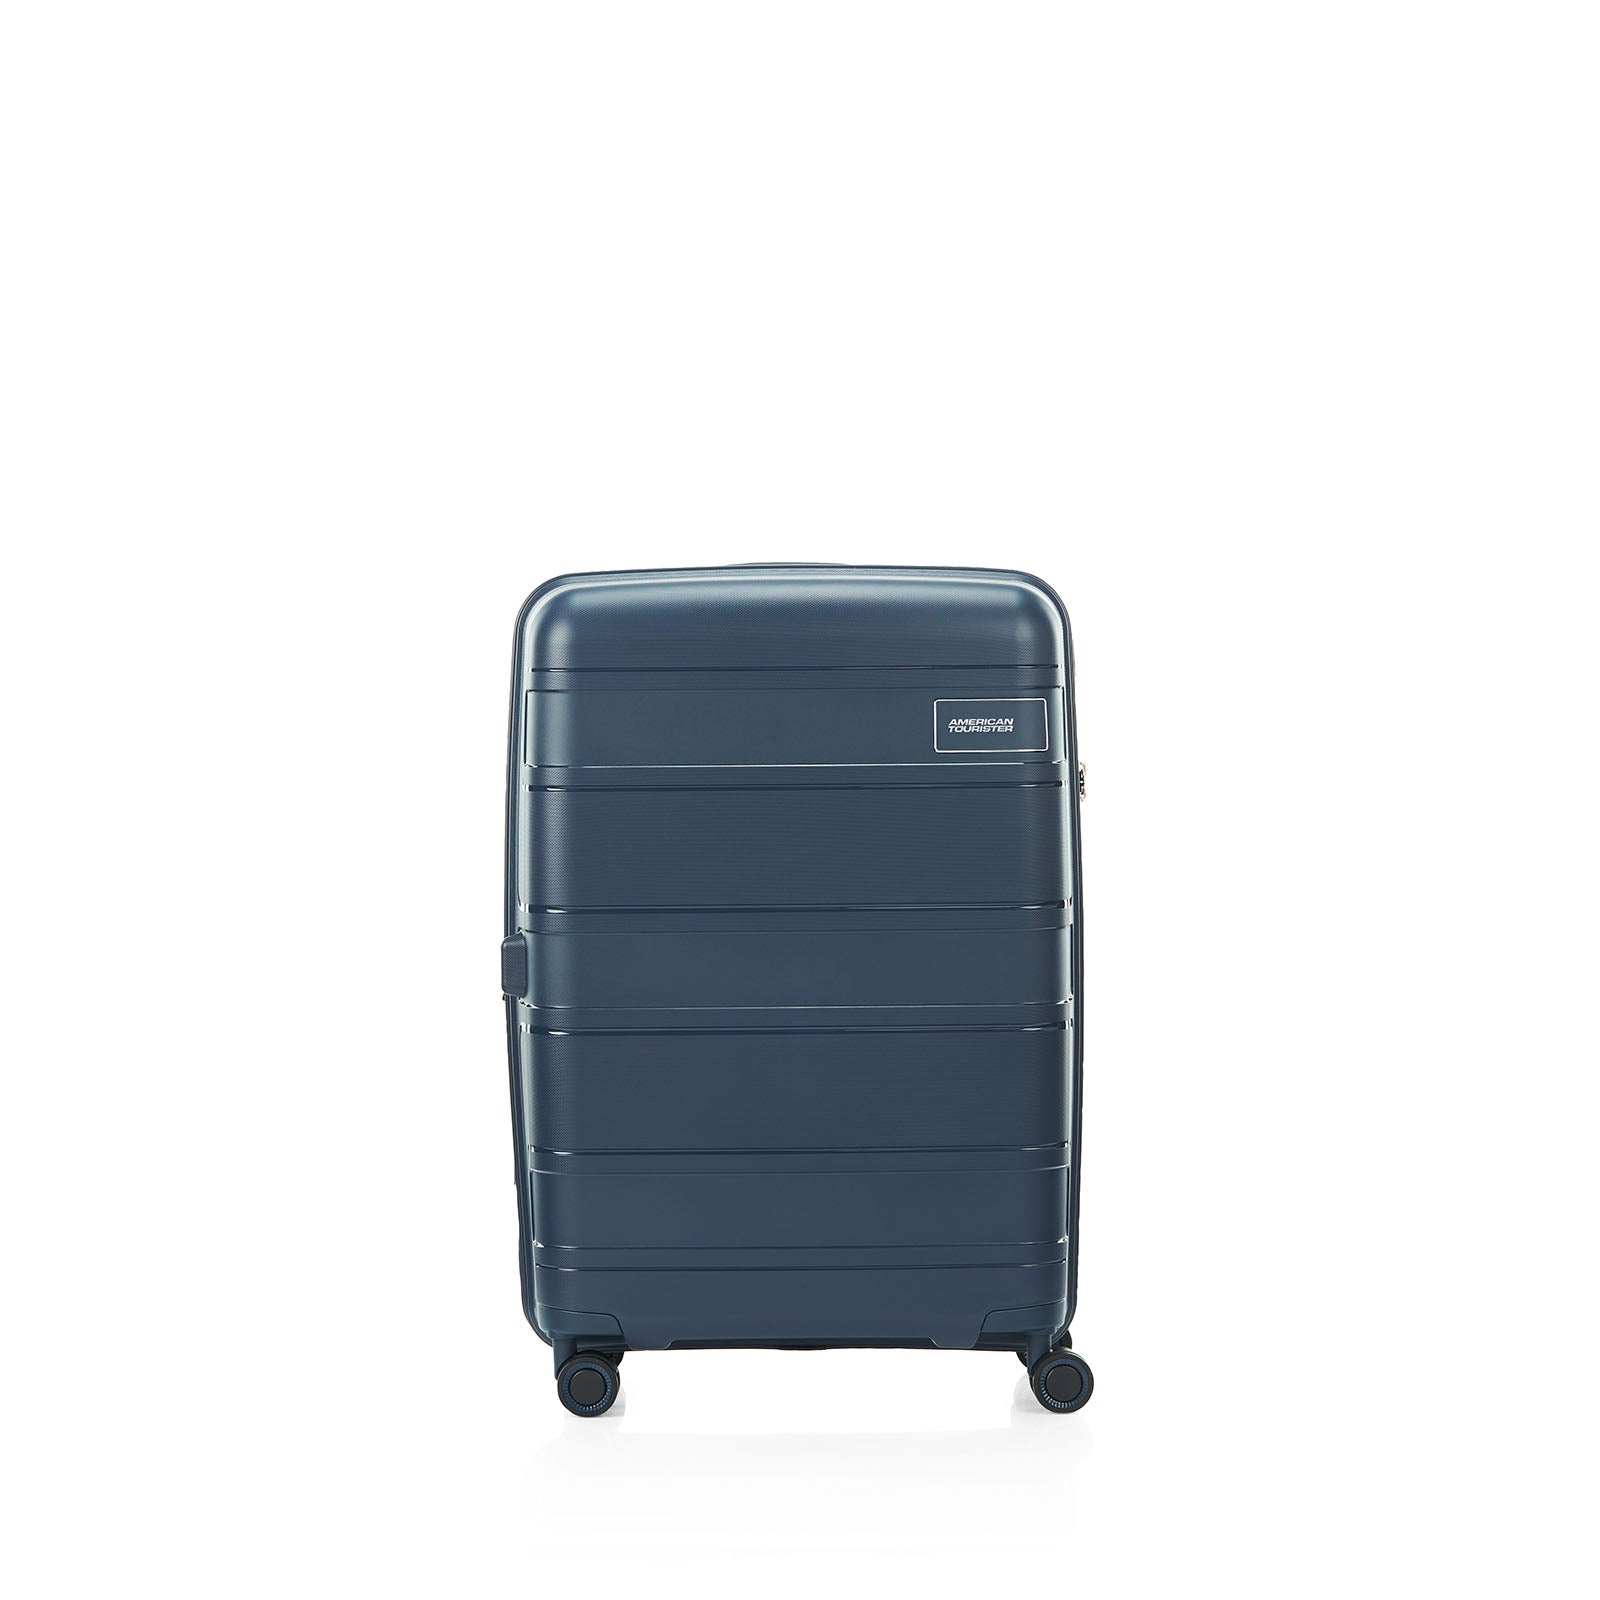 American-Tourister-Light-Max-69cm-Suitcase-Navy-Front